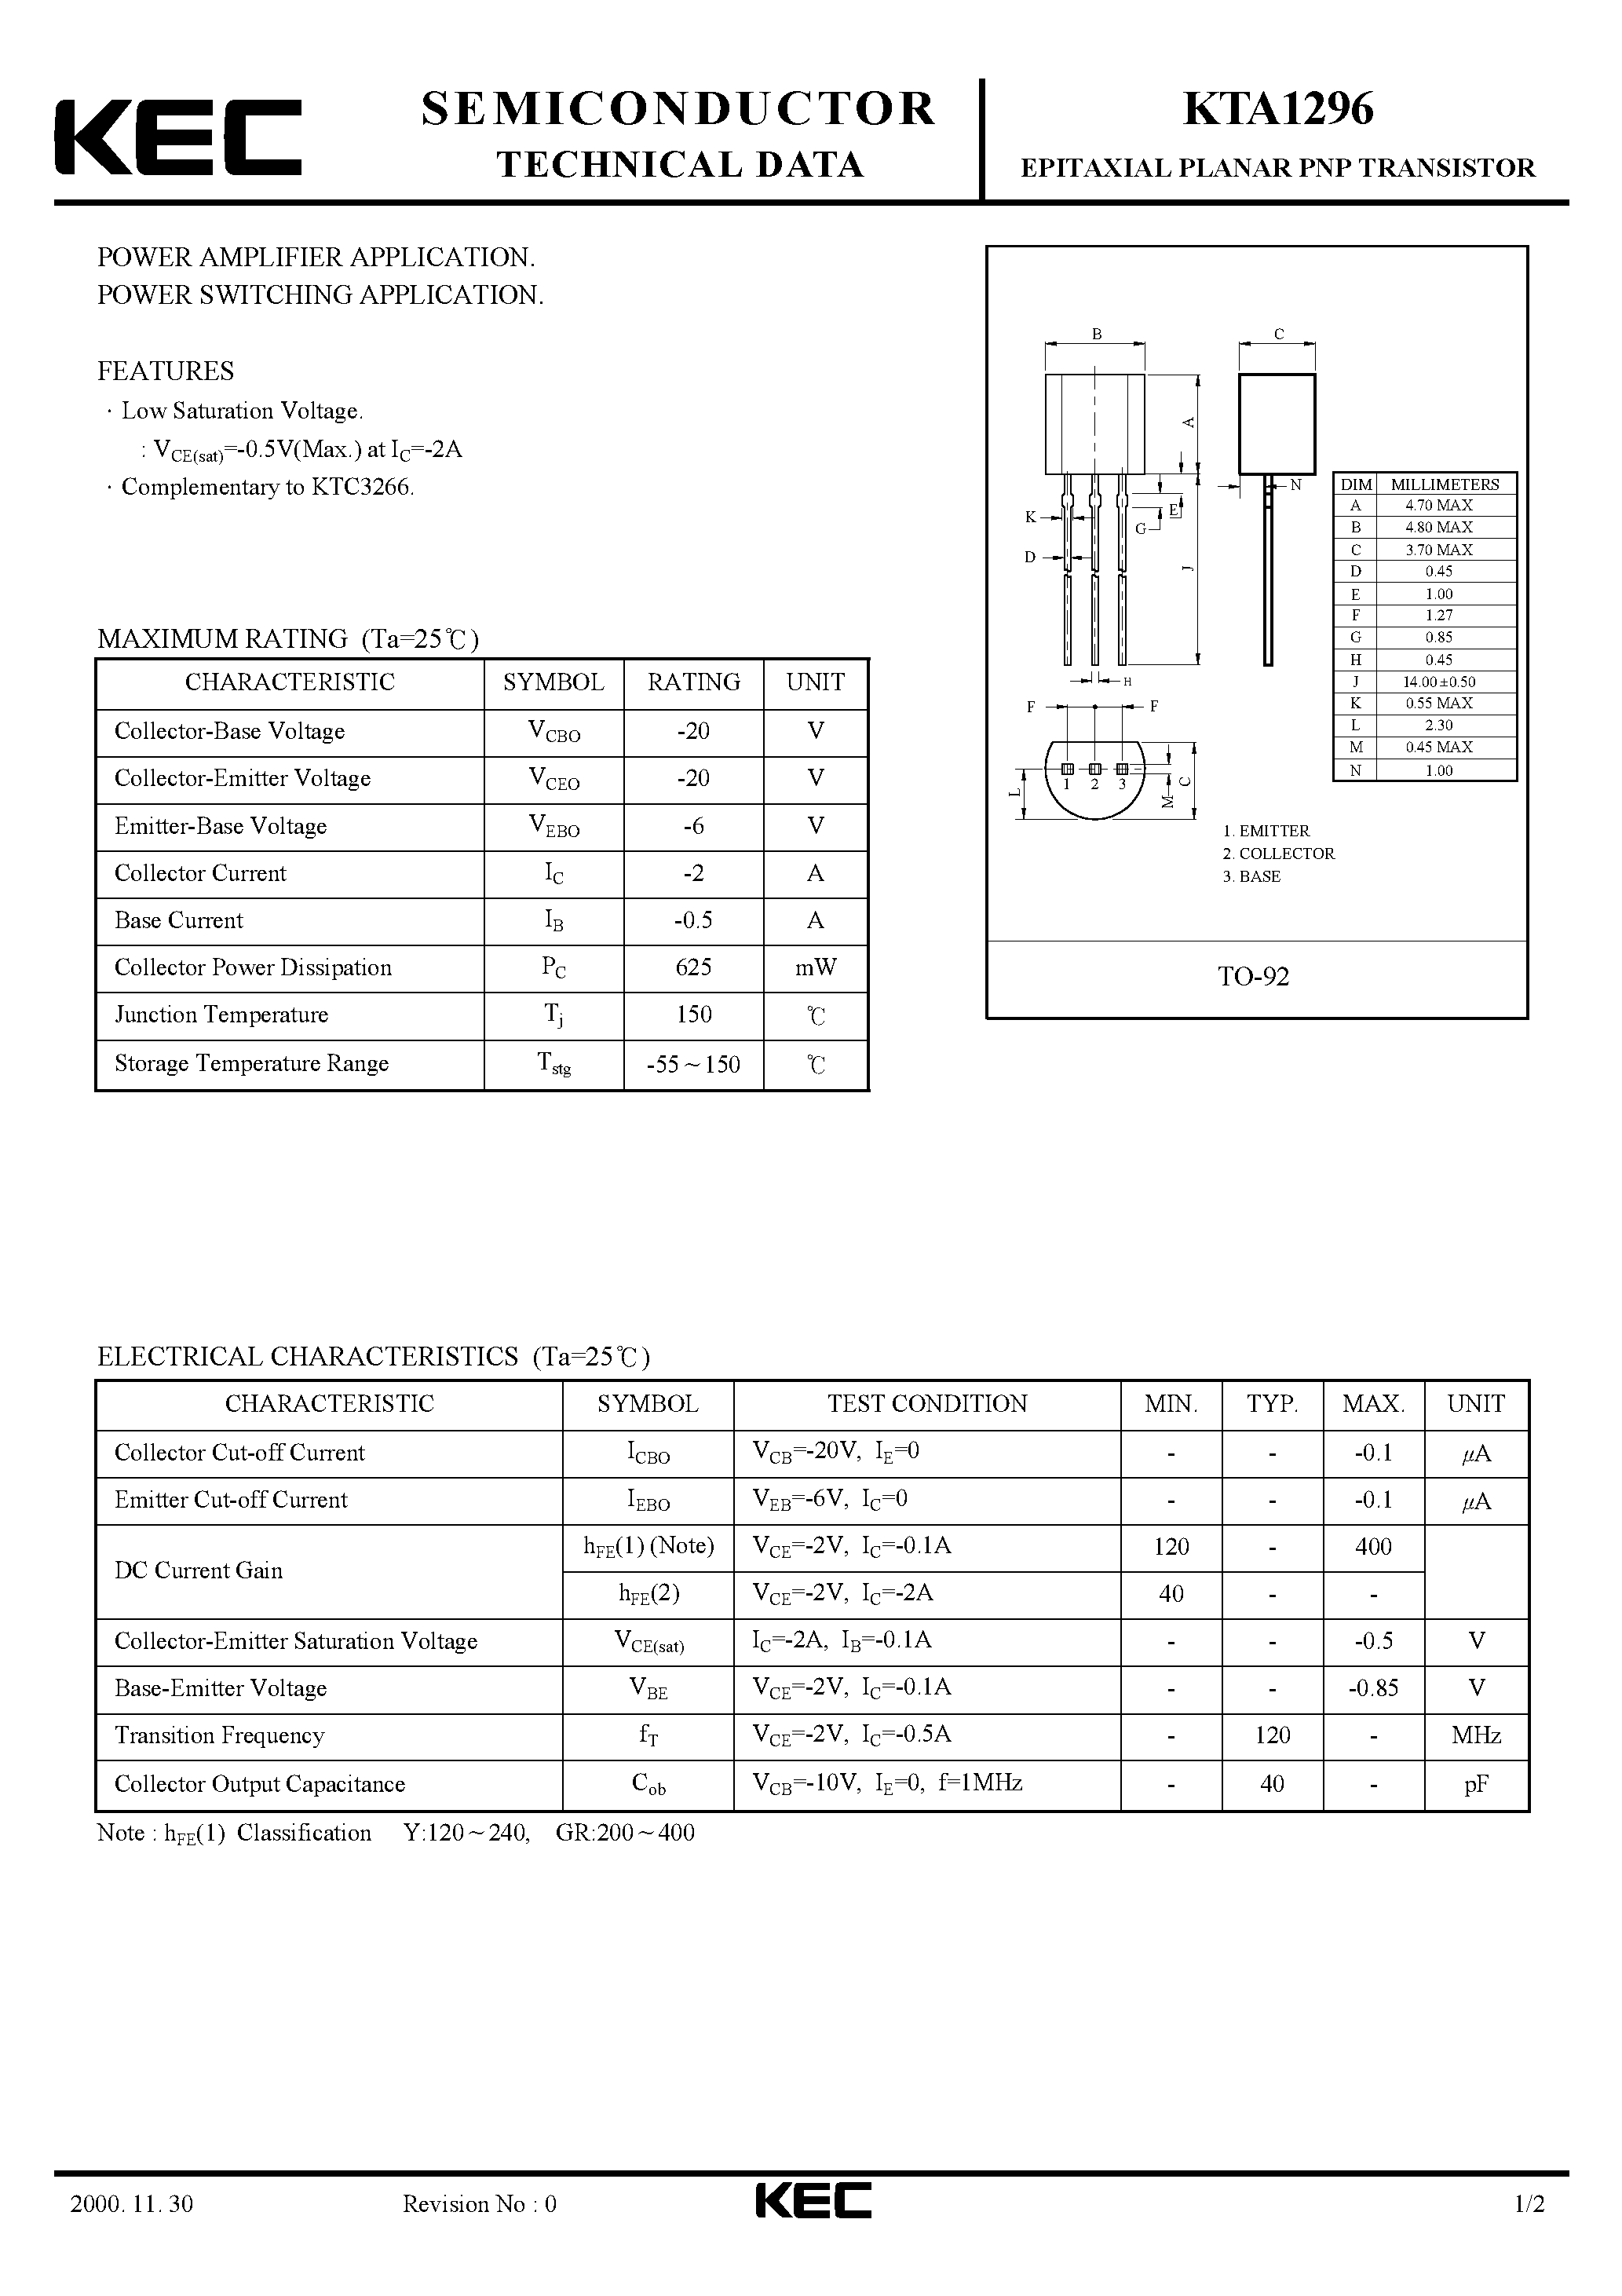 Даташит KTA1296 - EPITAXIAL PLANAR PNP TRANSISTOR (POWER AMPLIFIER/ POWER SWITCHING) страница 1